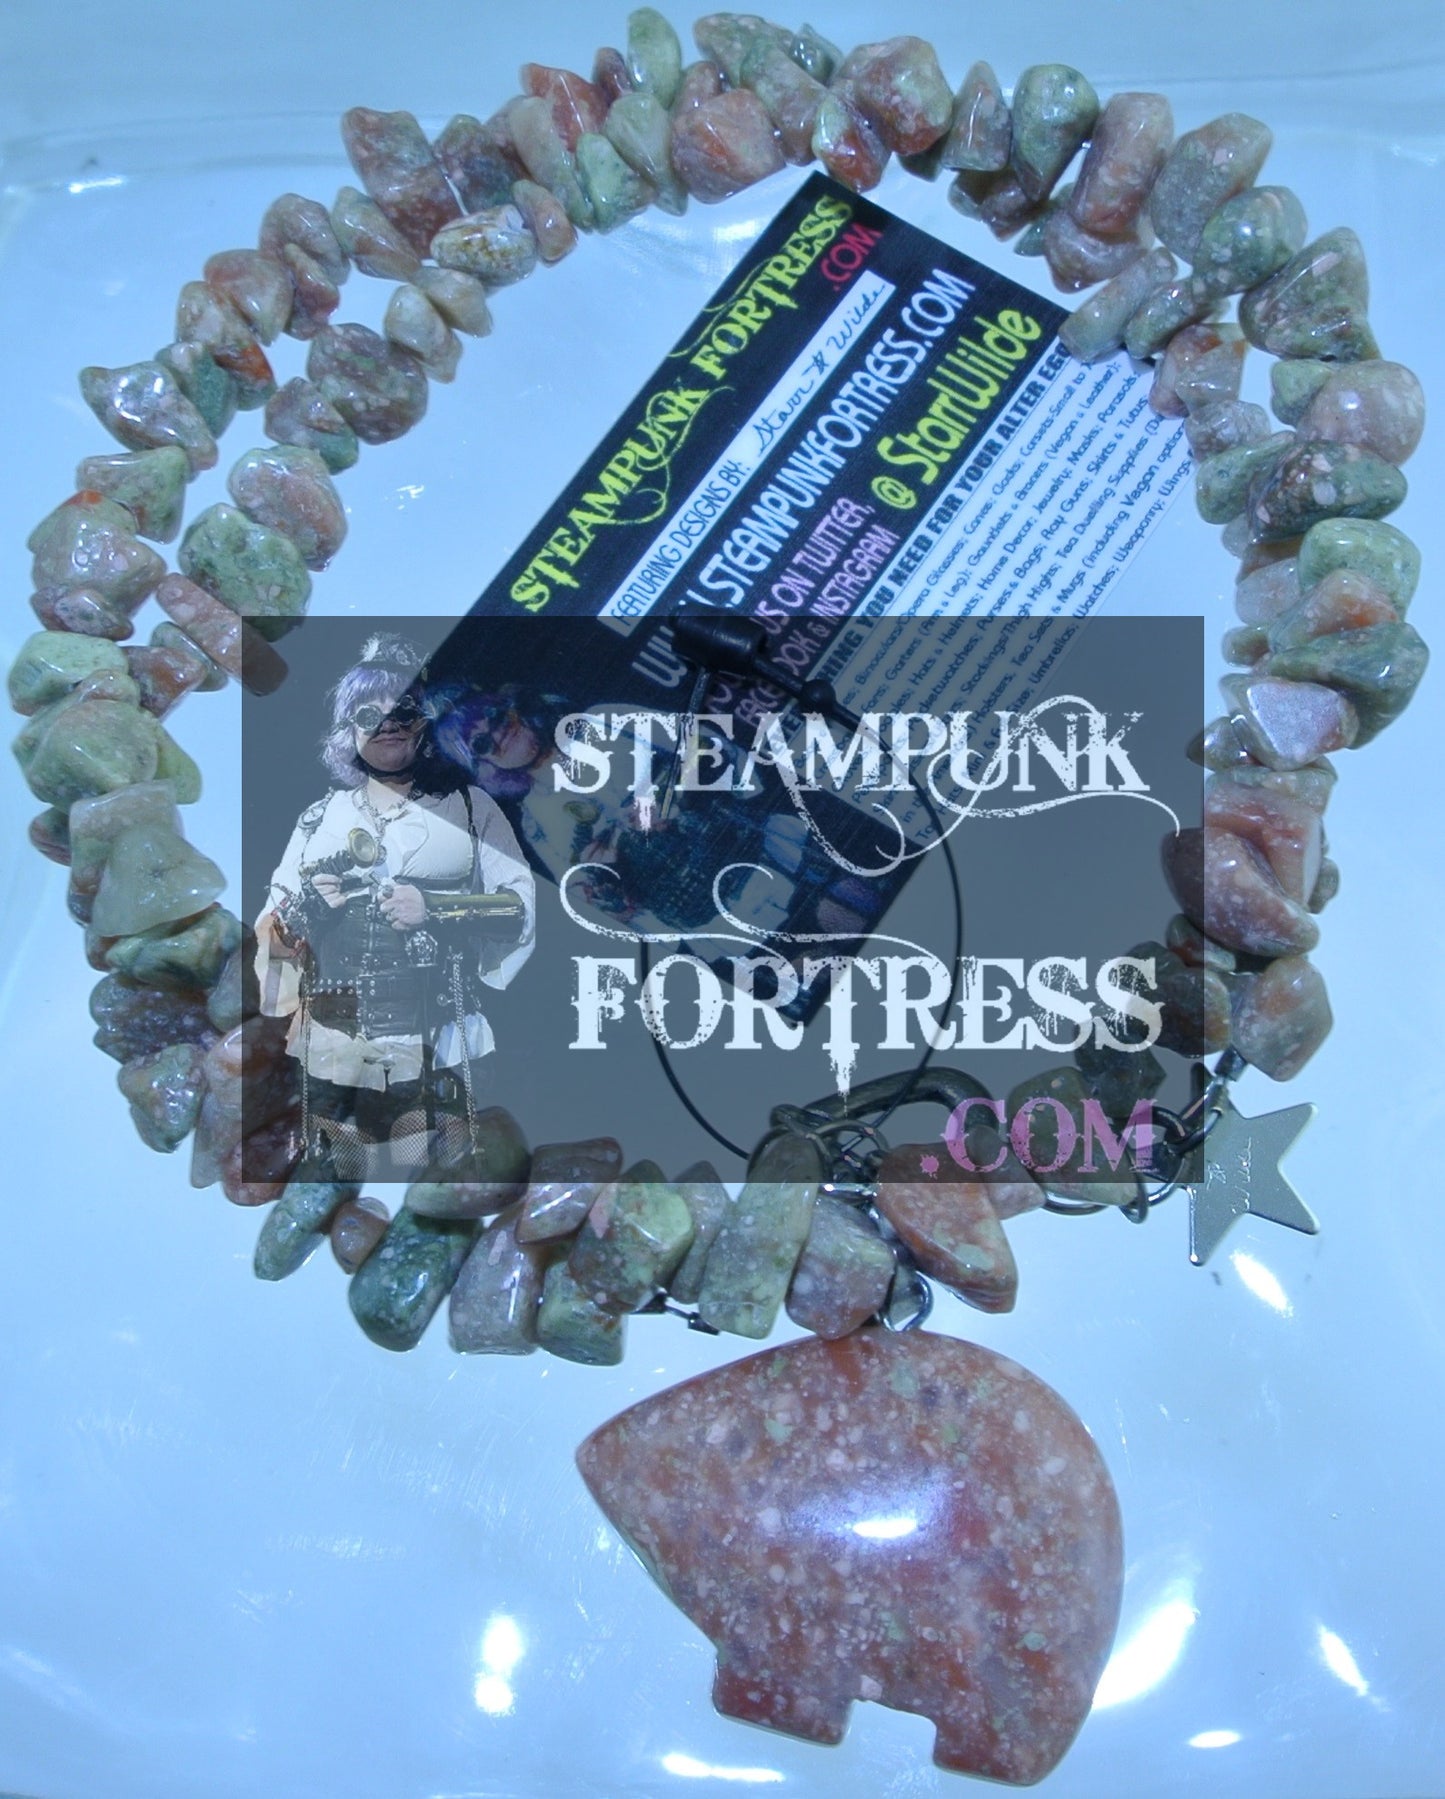 SILVER JASPER AUTUMN ZUNI BEAR HEART TOGGLE GEMSTONES STONES CHIPS NECKLACE SET AVAILABLE STARR WILDE STEAMPUNK FORTRESS